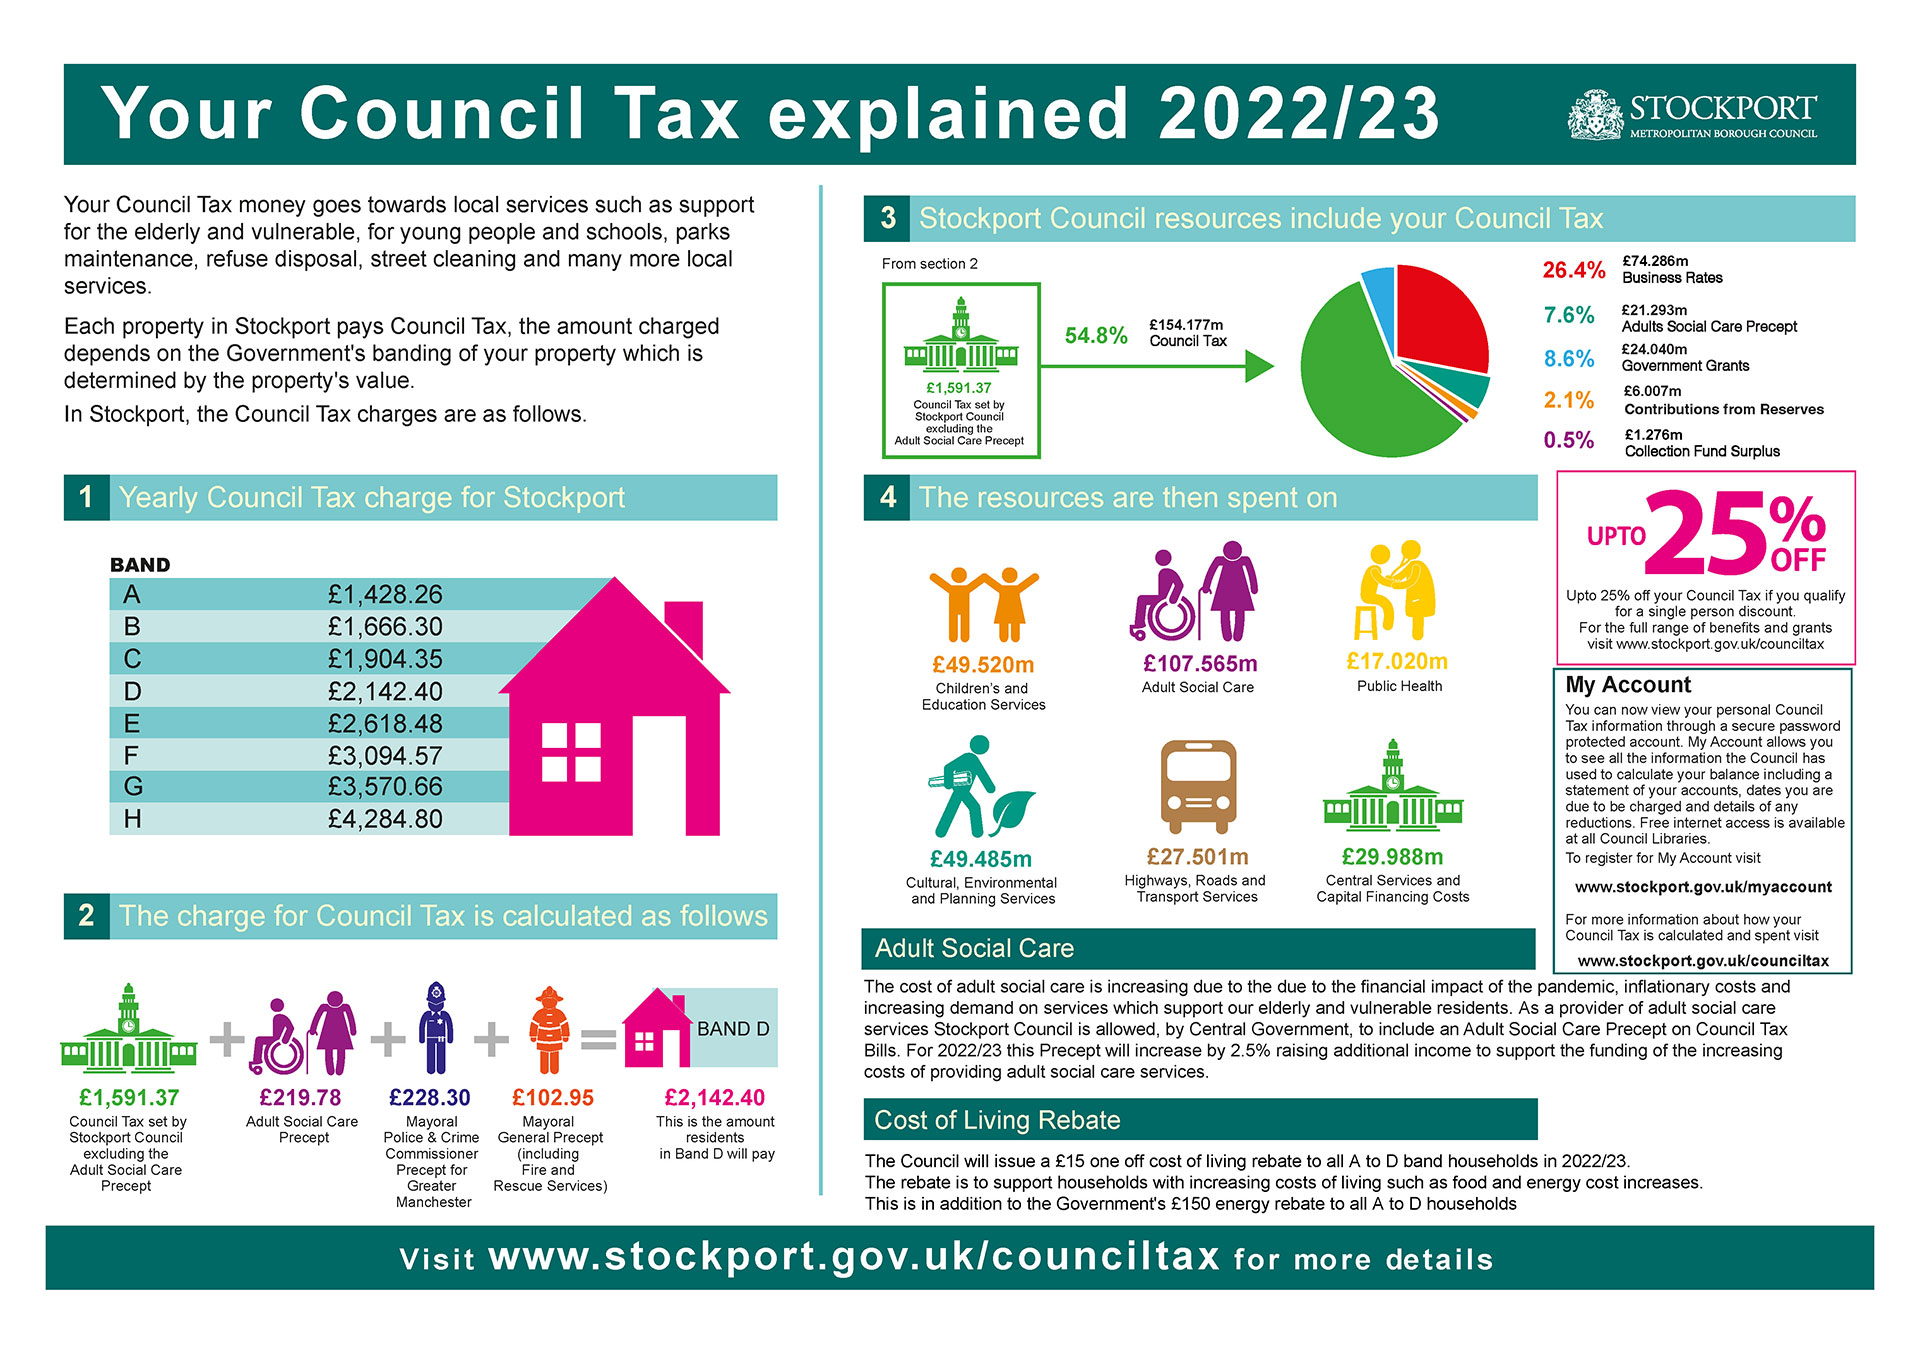 What your Council Tax pays for